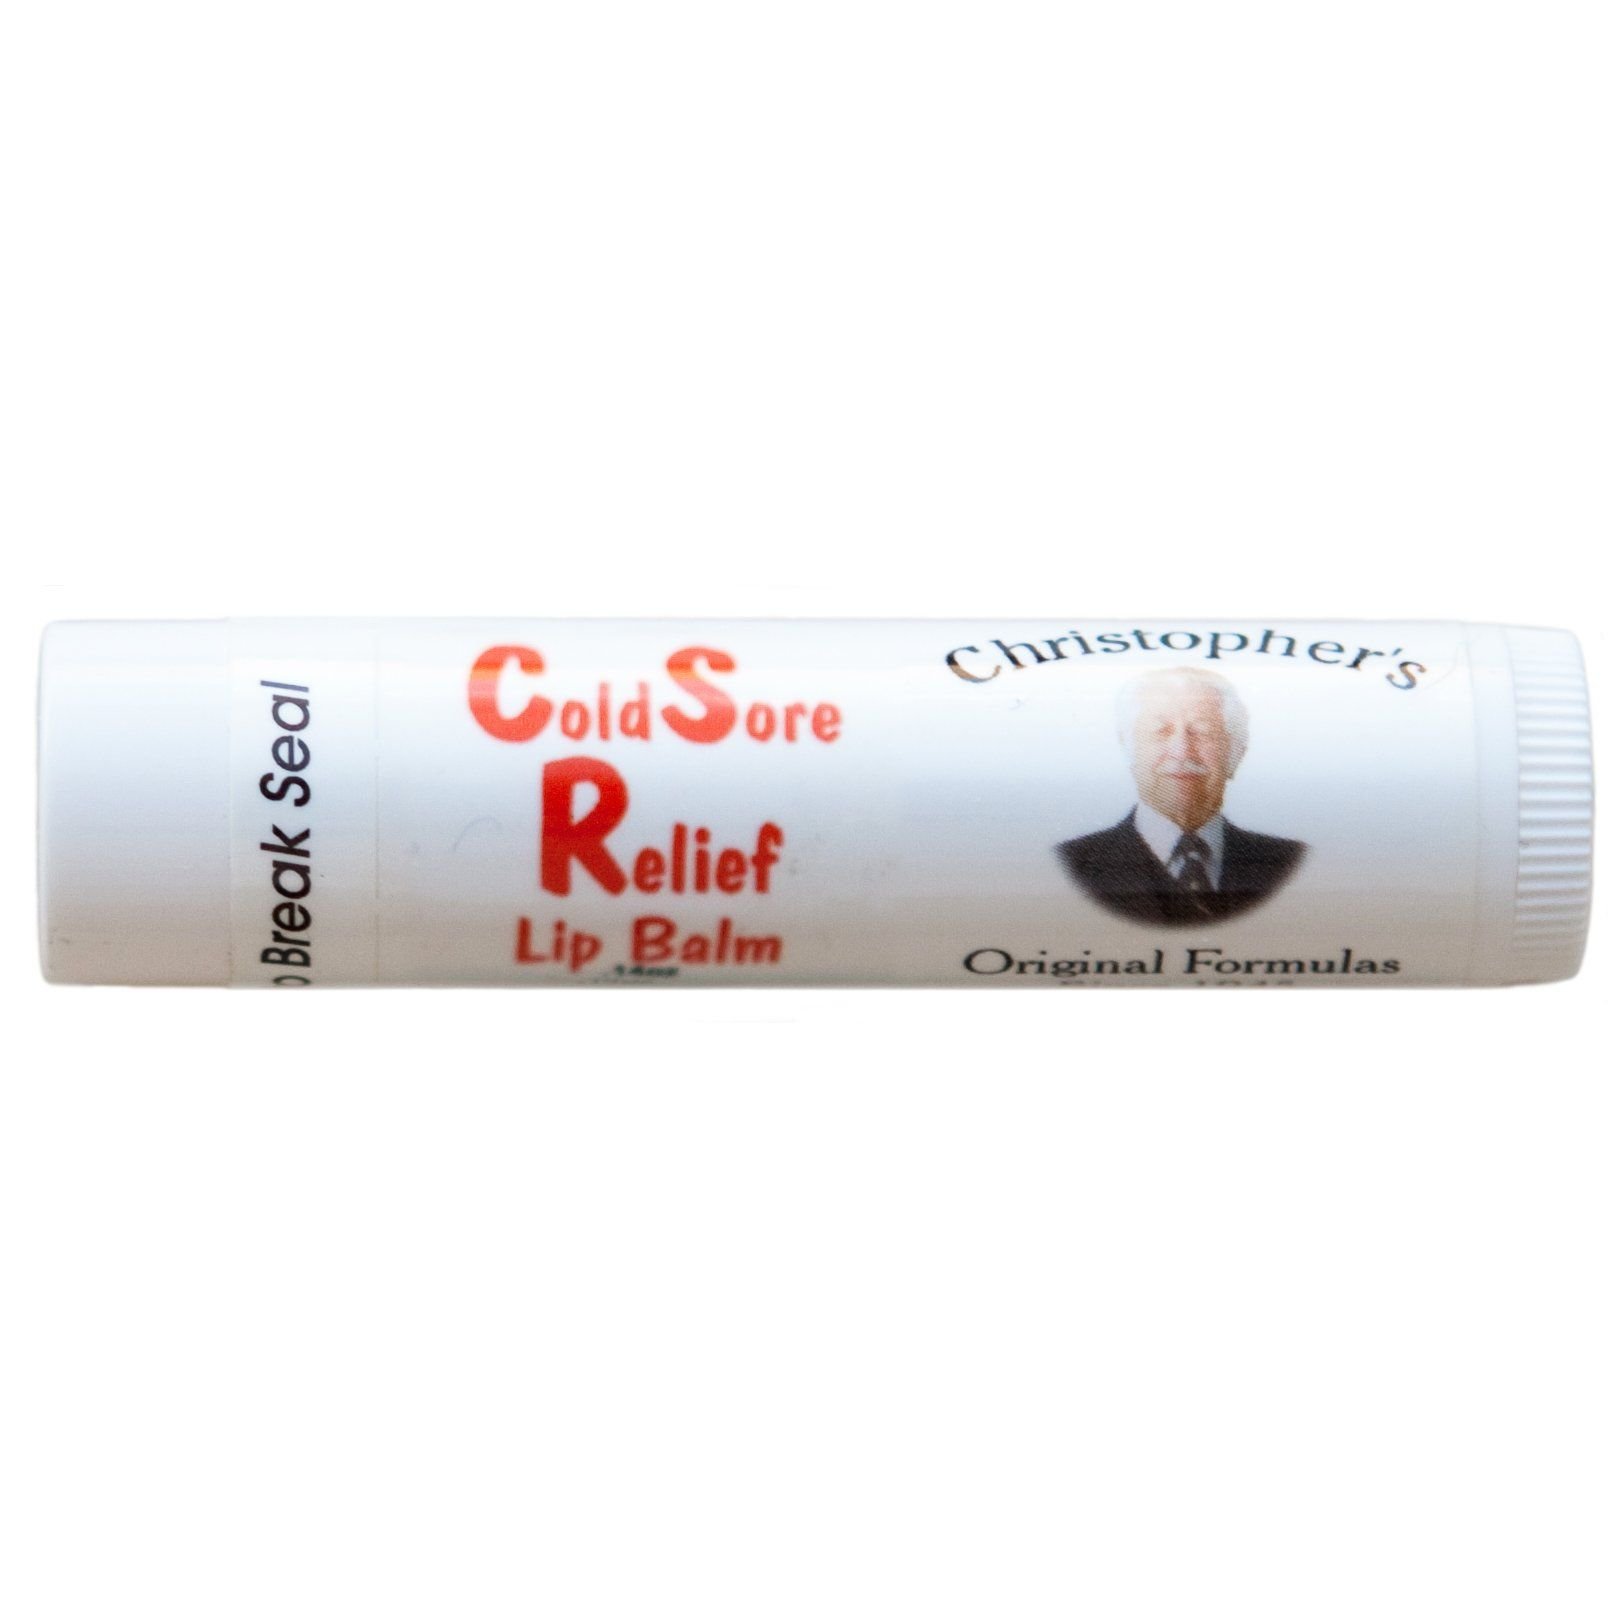 HOTIME Dr. Christopher Cold Sore Relief Lip Balm Specialty - 0.14 Oz